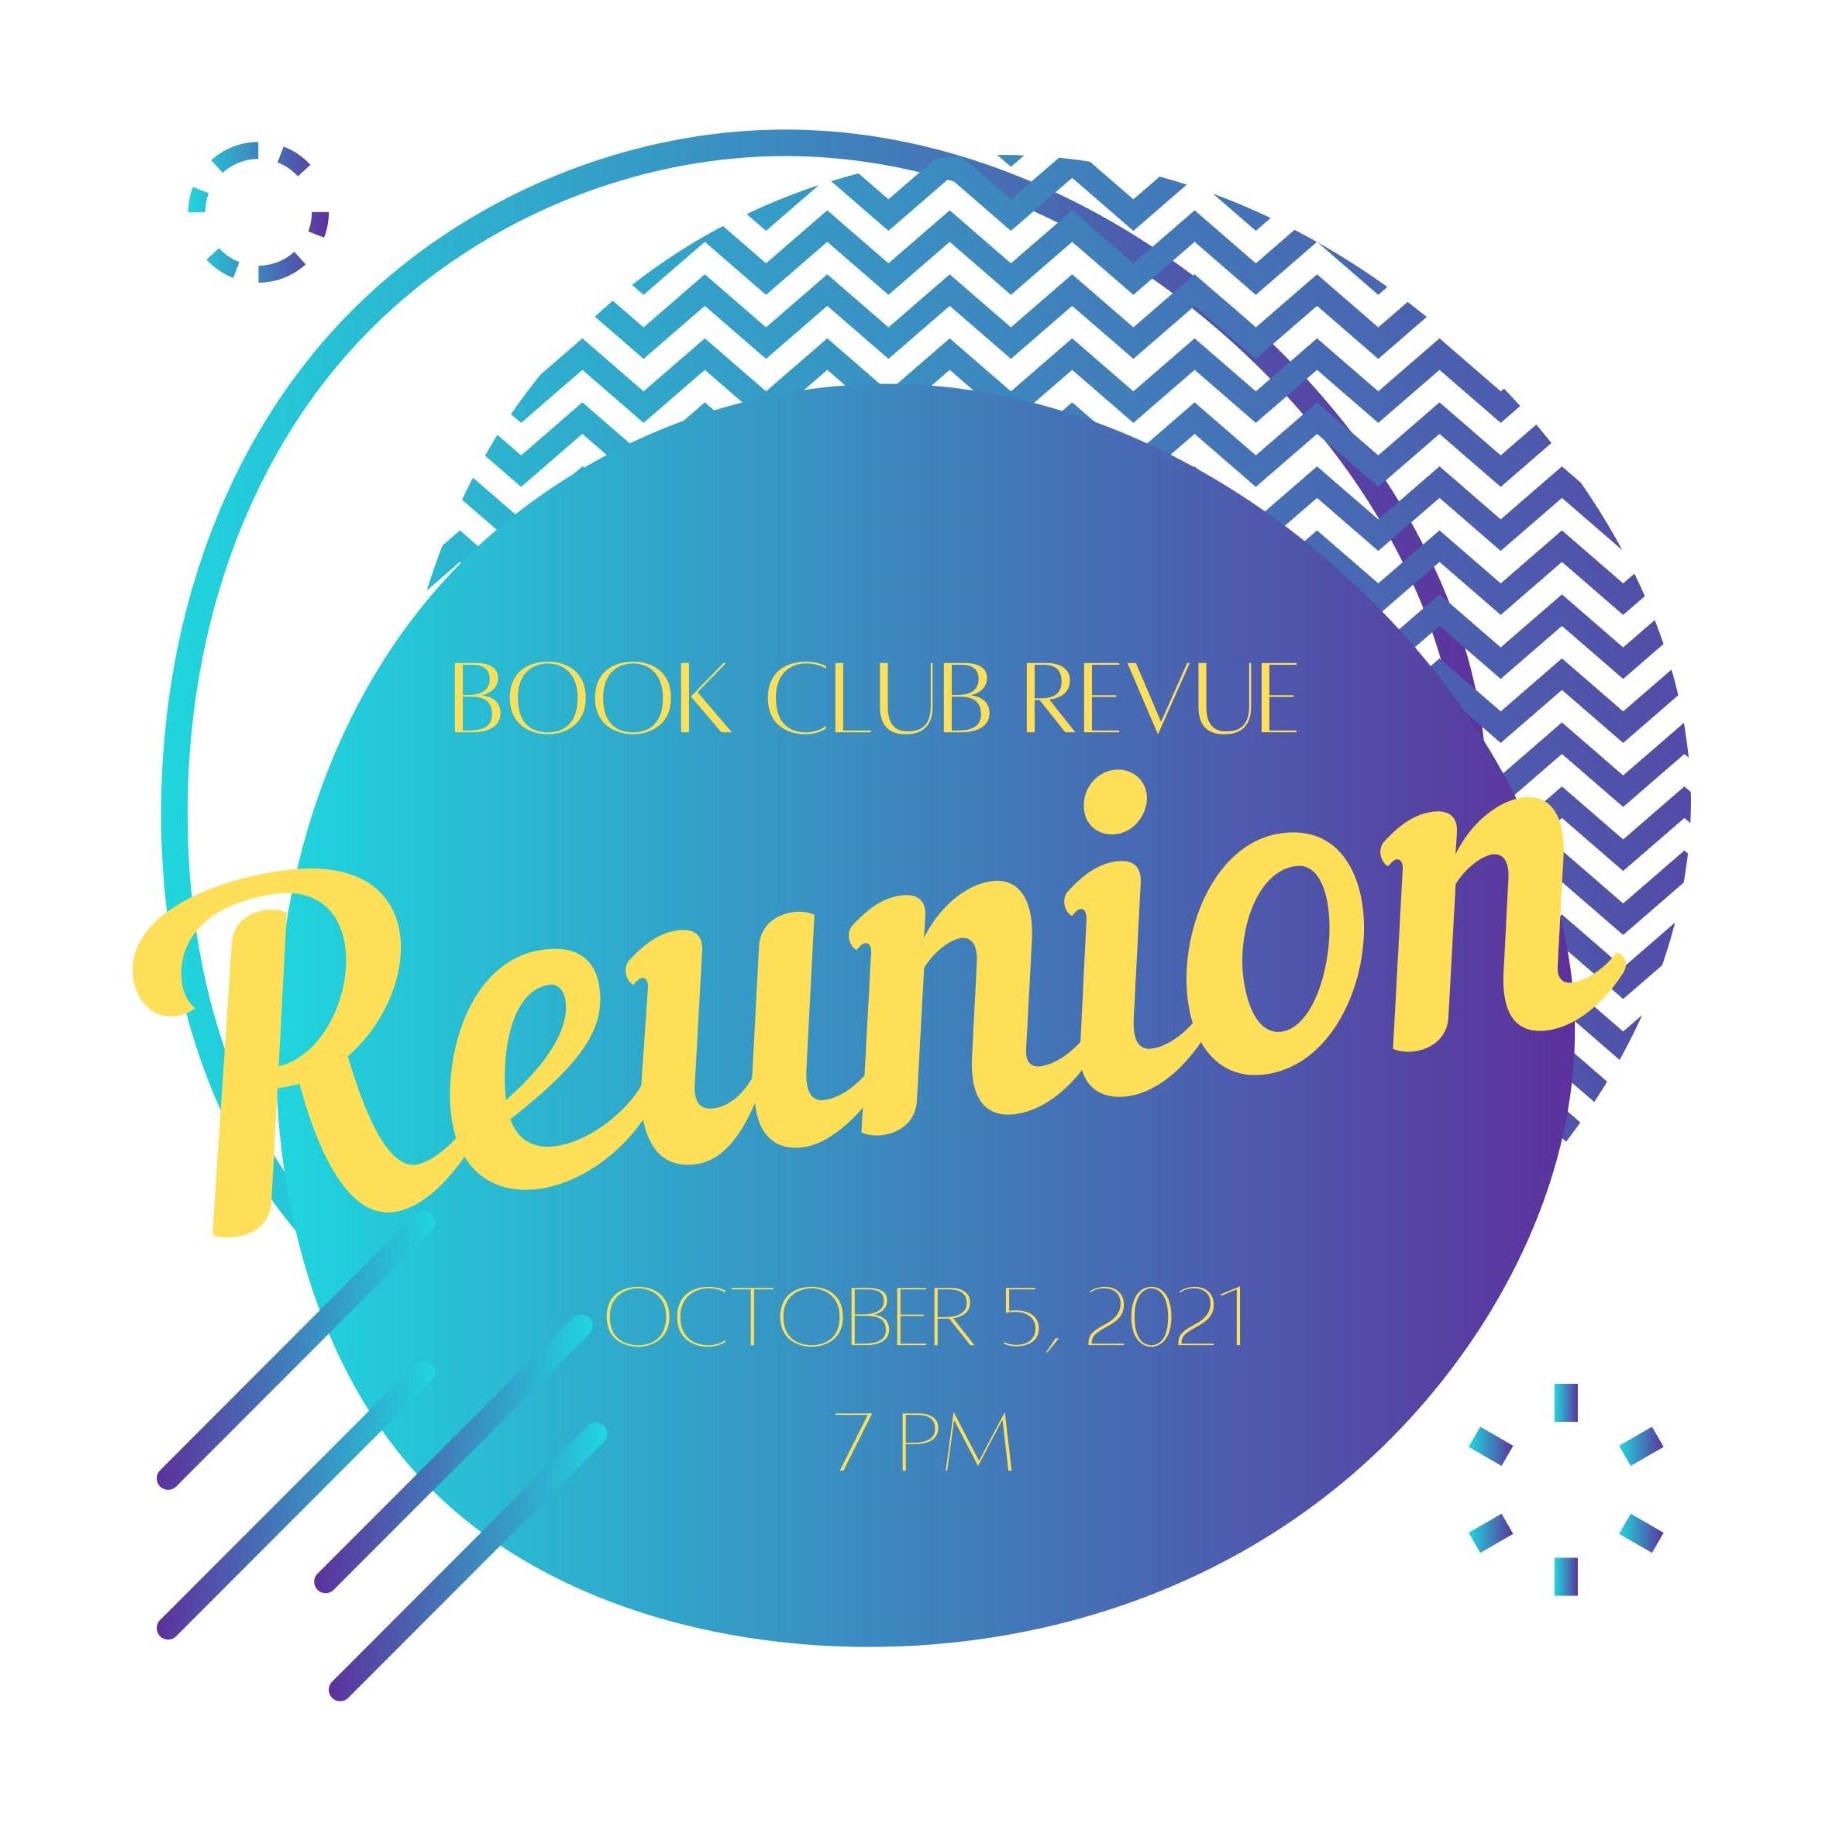 Promotional logo for Book Club Revue